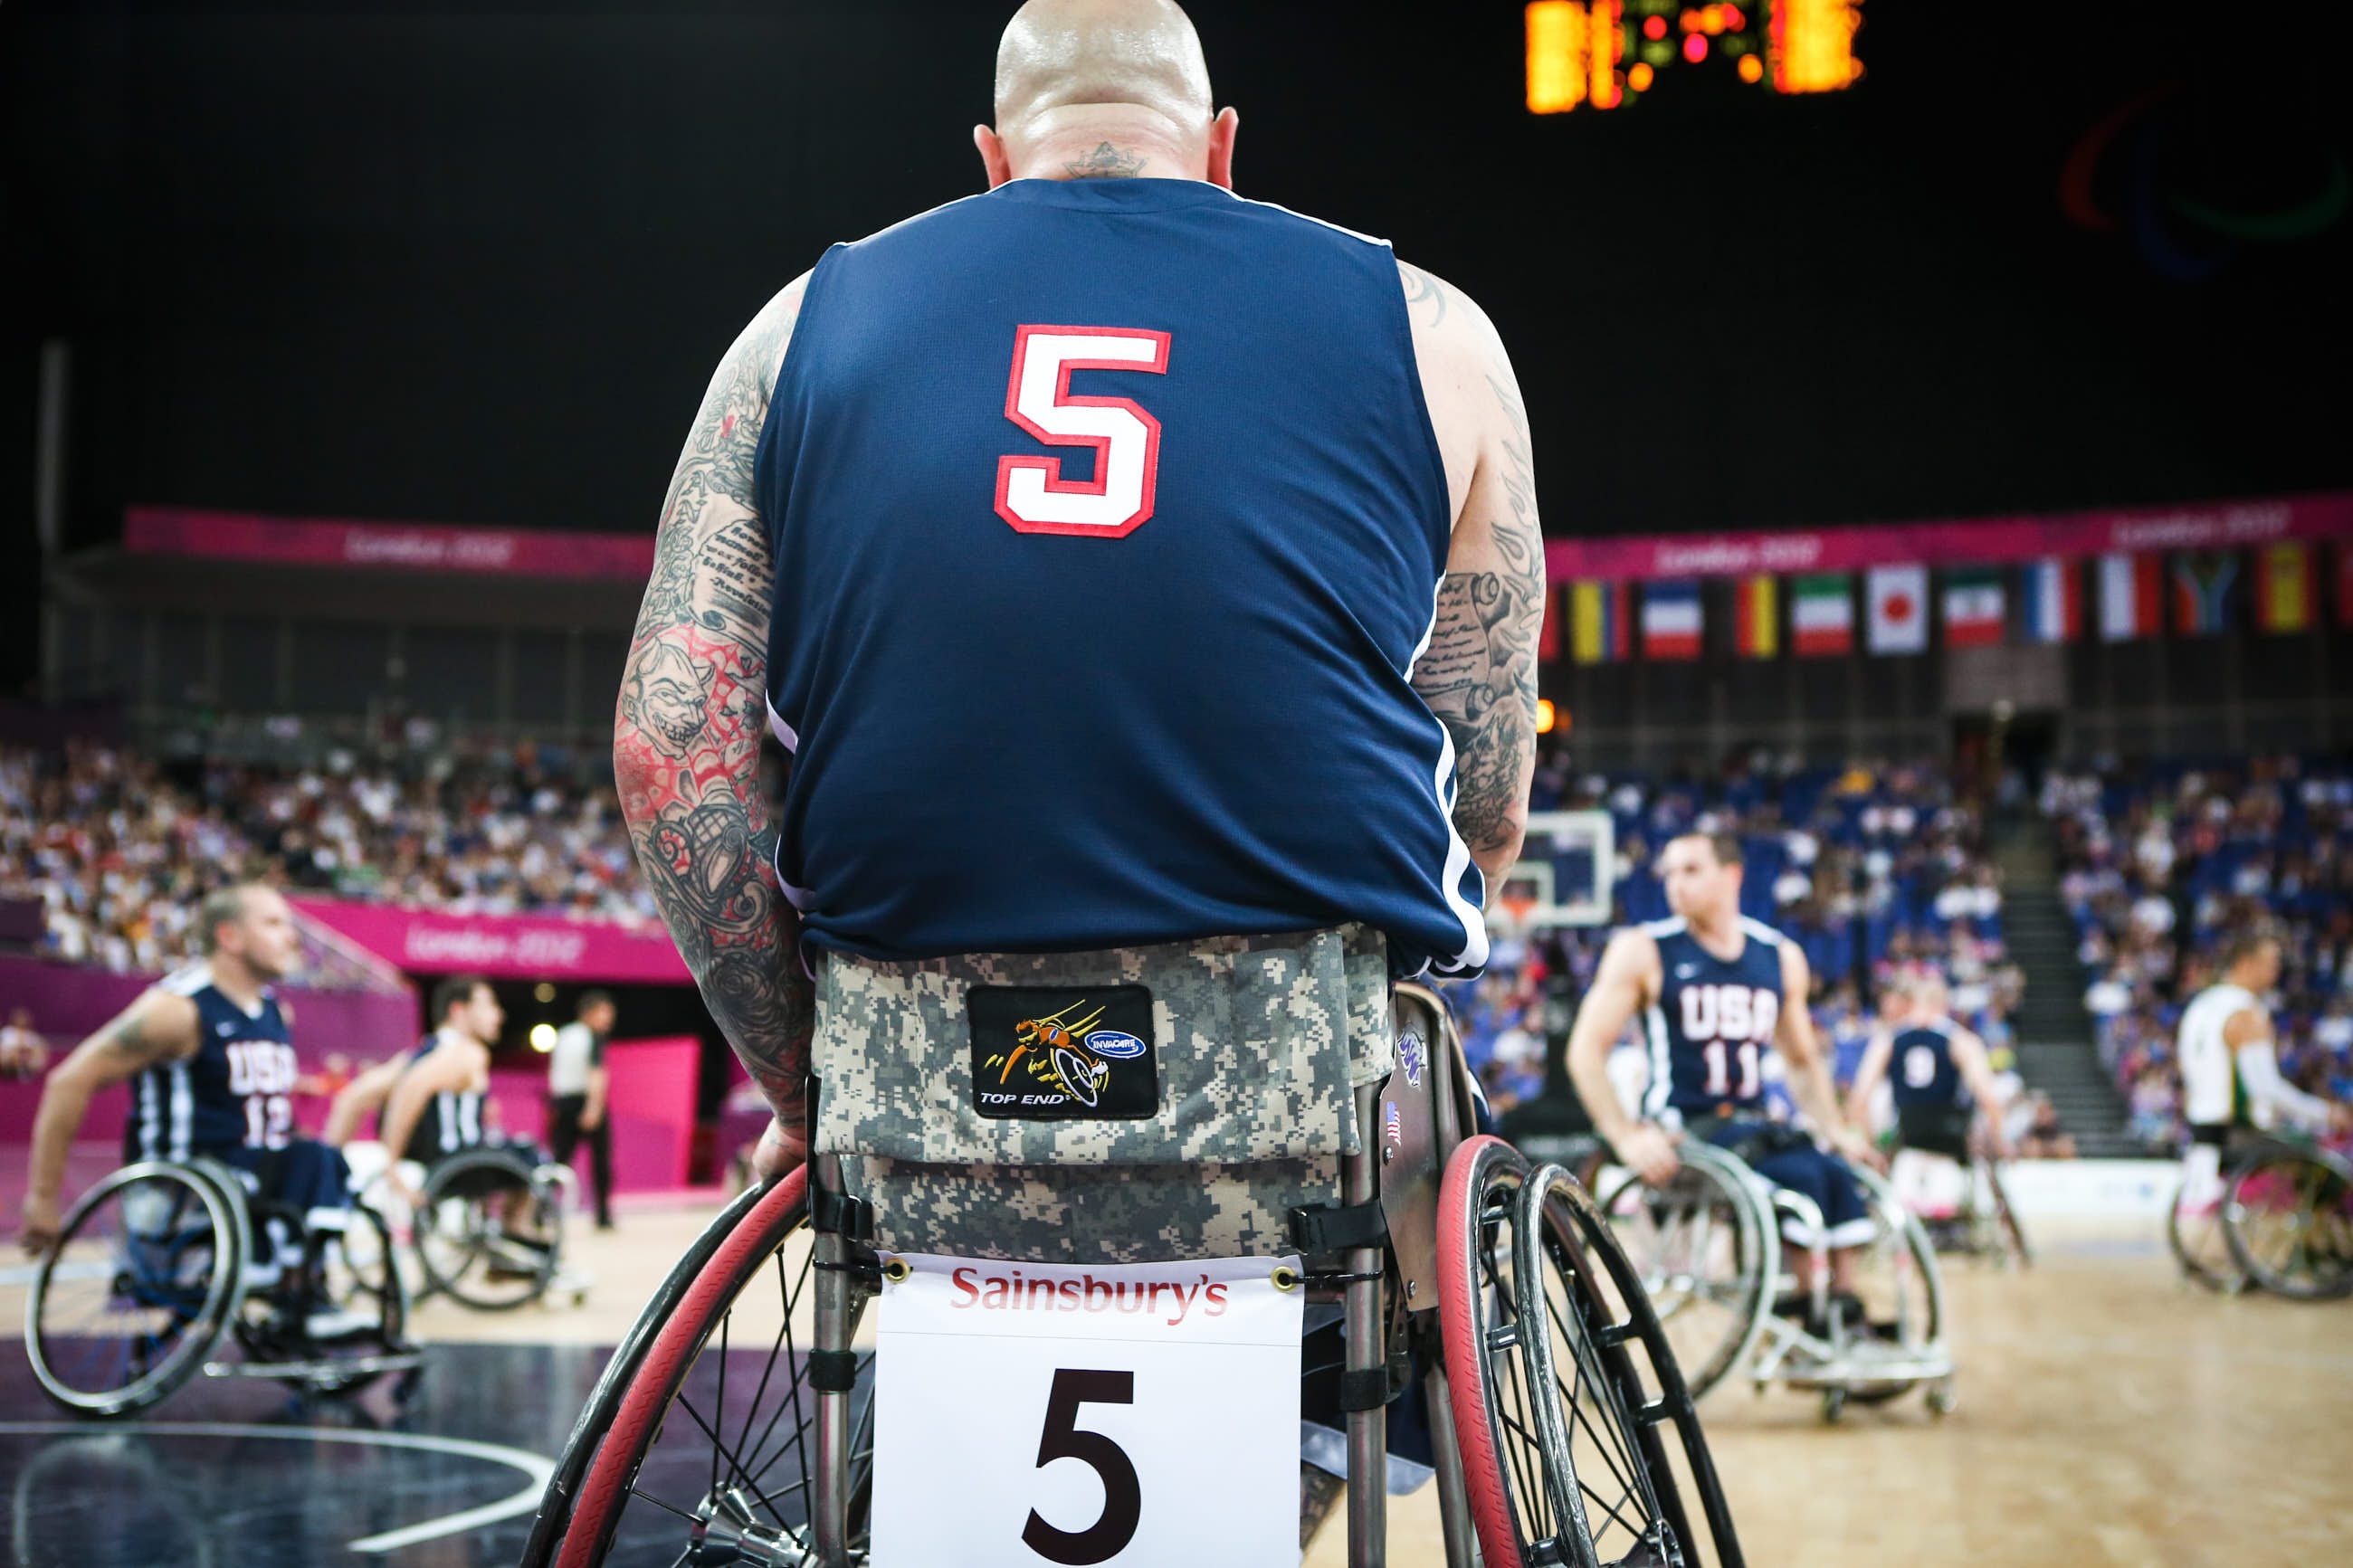 06.09.2012 London, England. Men's Wheelchair Basketball Semi Final (USA) vs (AUS) J Chambers (USA) in action during Day 7 of the London 2012 Paralympic Games at the North Greenwich Arena